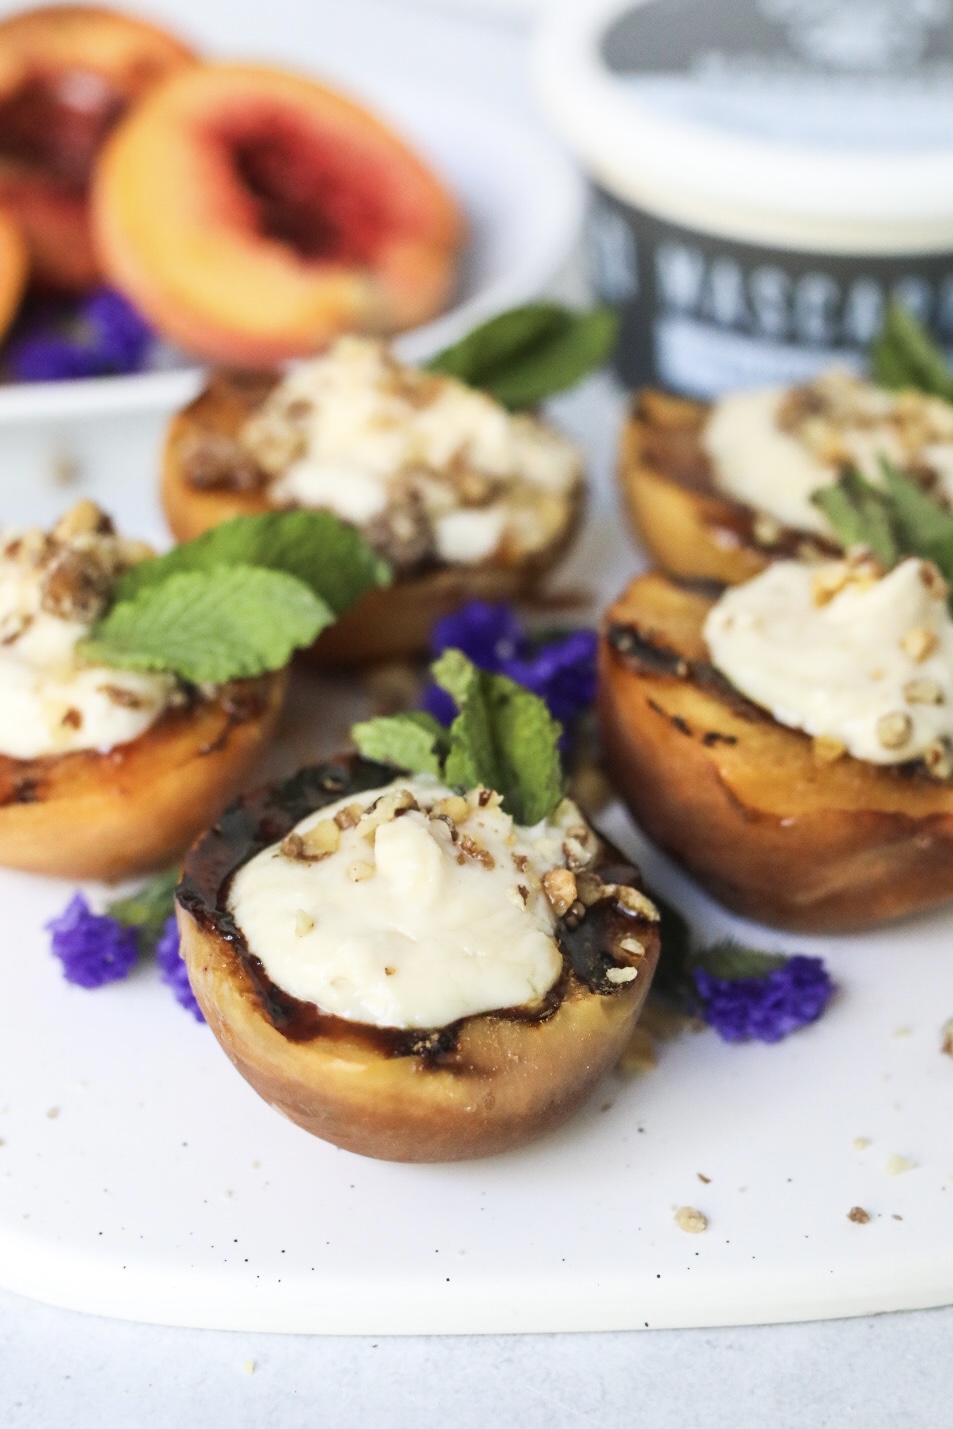 several peaches stuffed with mascarpone and topped with mint and walnuts for garnish